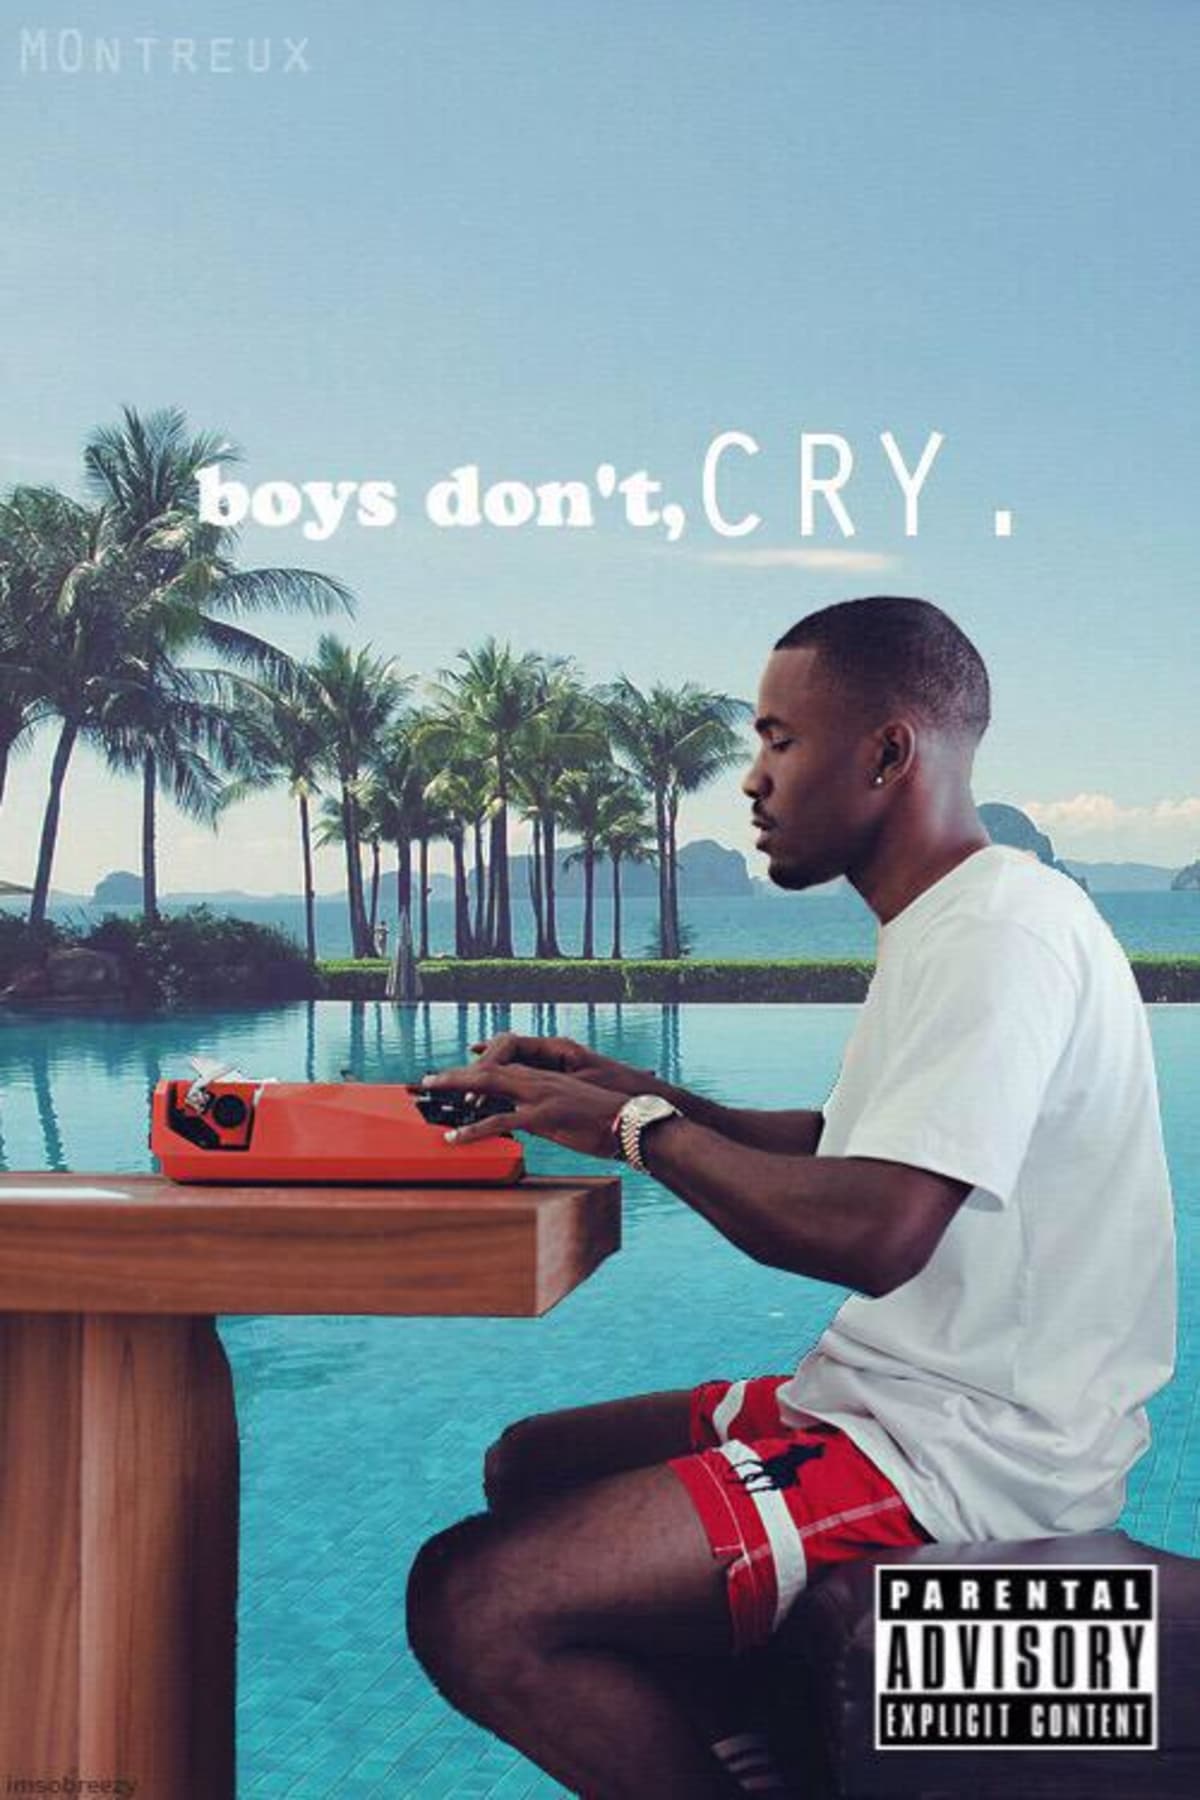 This Frank Ocean Album Cover Going Around Twitter Is Not 